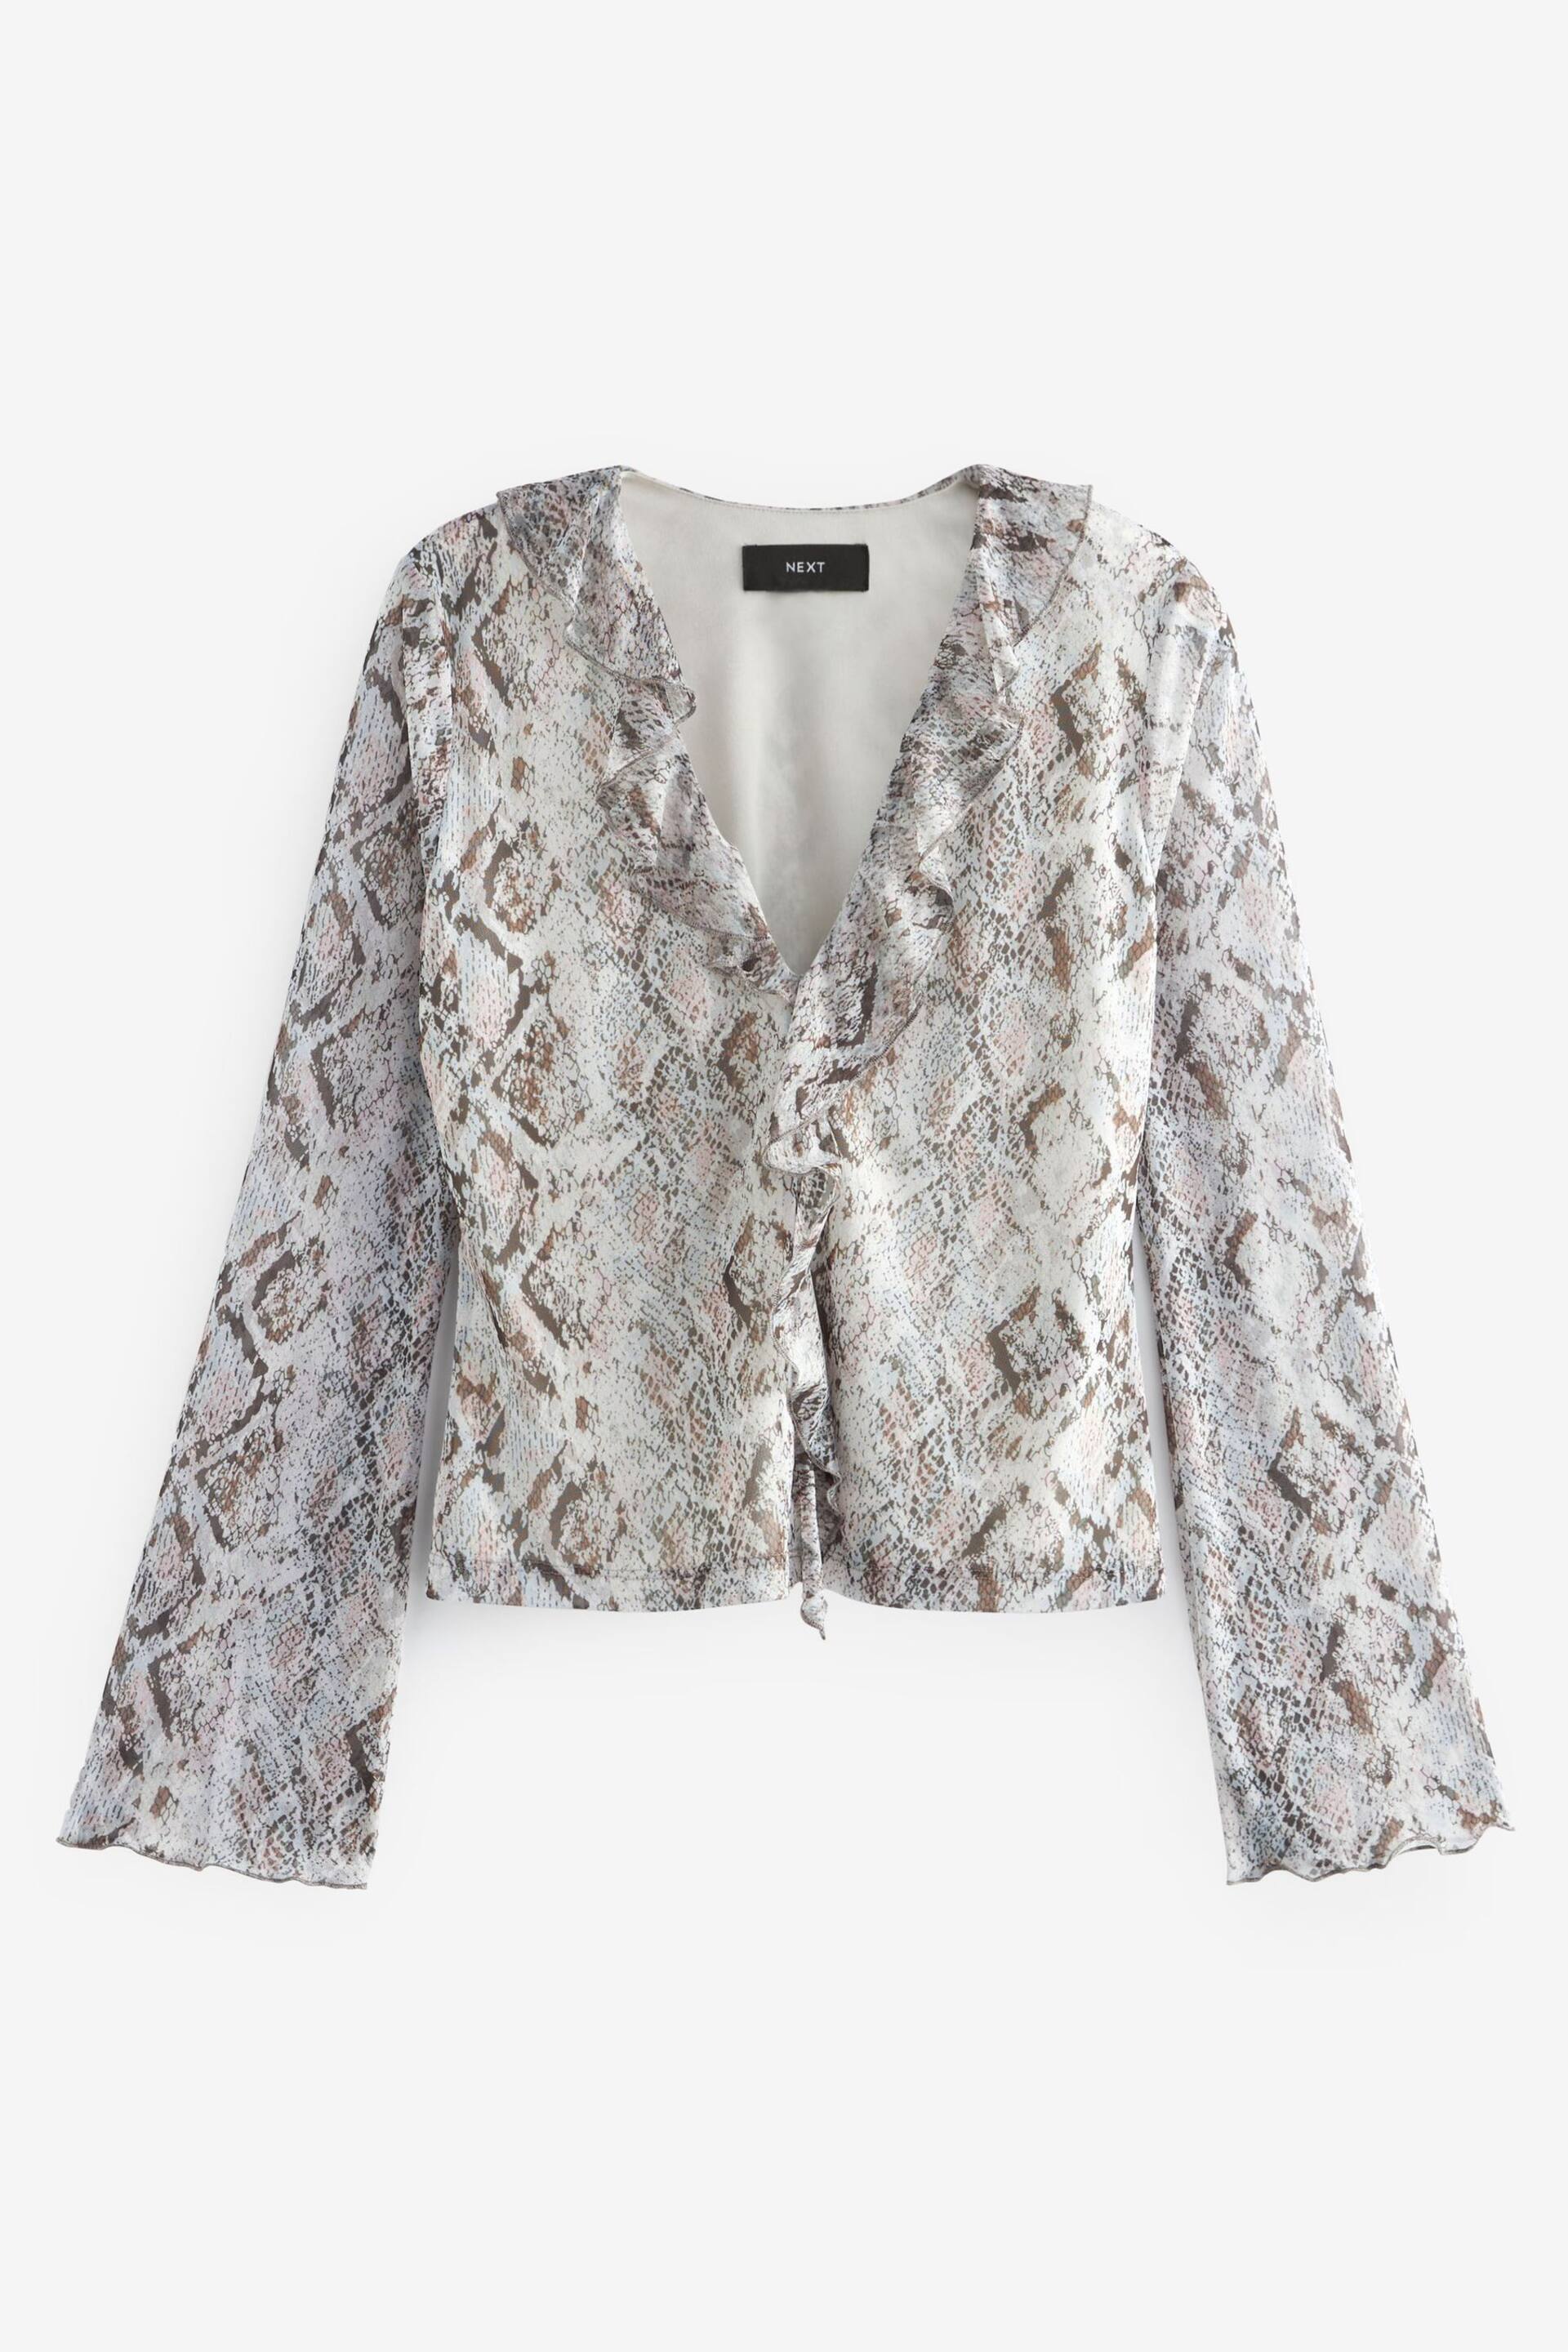 White Snake Print Long Sleeve Ruffle Front Mesh Top - Image 5 of 6